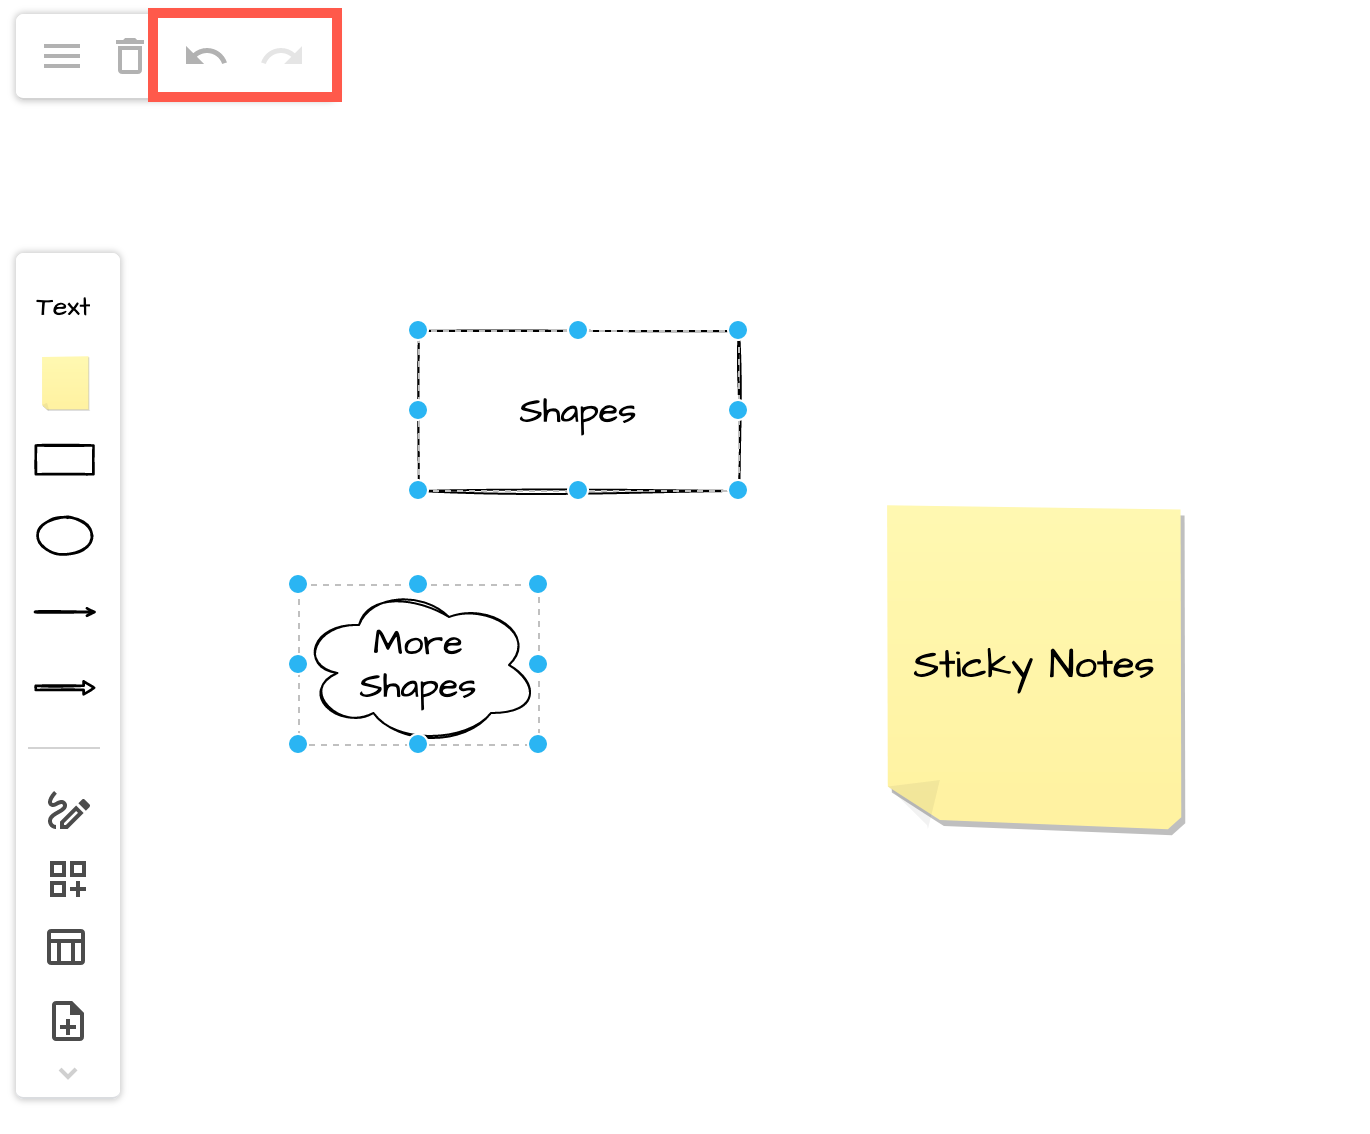 Undo and redo changes easily with the tools in the top right of the diagrams.net Sketch online whiteboard